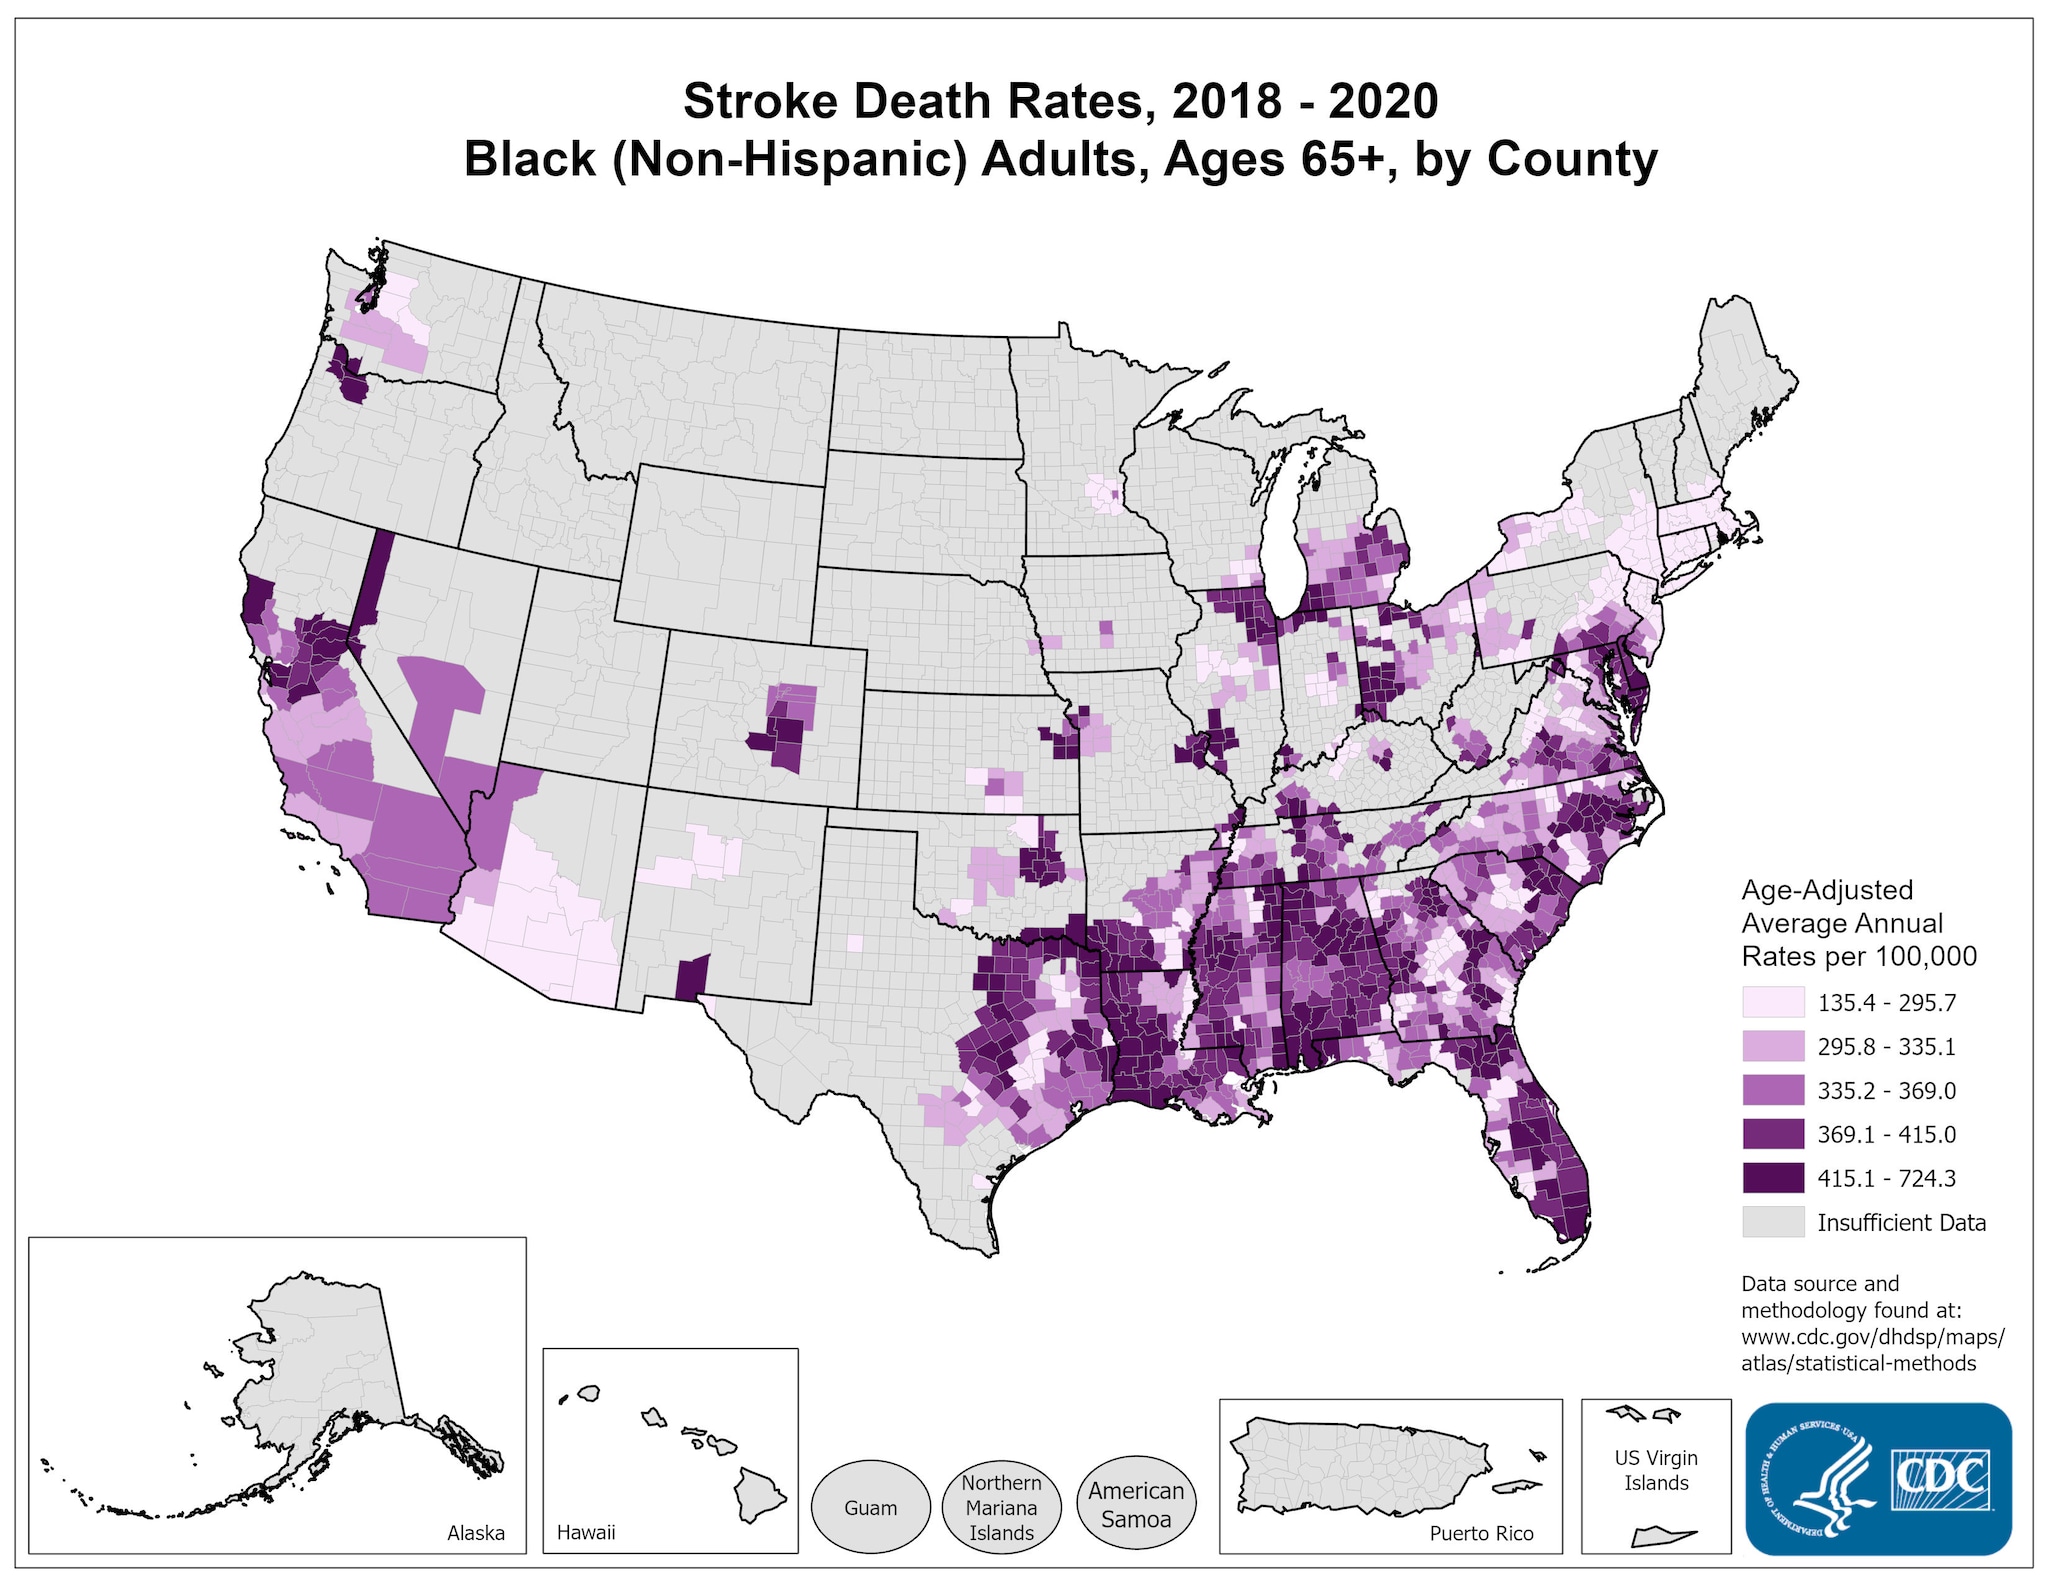 Stroke Death Rates for 2014 through 2016 for Blacks Aged 65 Years and Older by County. The map shows that concentrations of counties with the highest stroke death rates - meaning the top quintile - are located primarily in parts of eastern Texas, Louisiana, and Arkansas. Pockets of high-rate counties also are found in Pennsylvania, North Carolina, South Carolina, Georgia, and Illinois. 